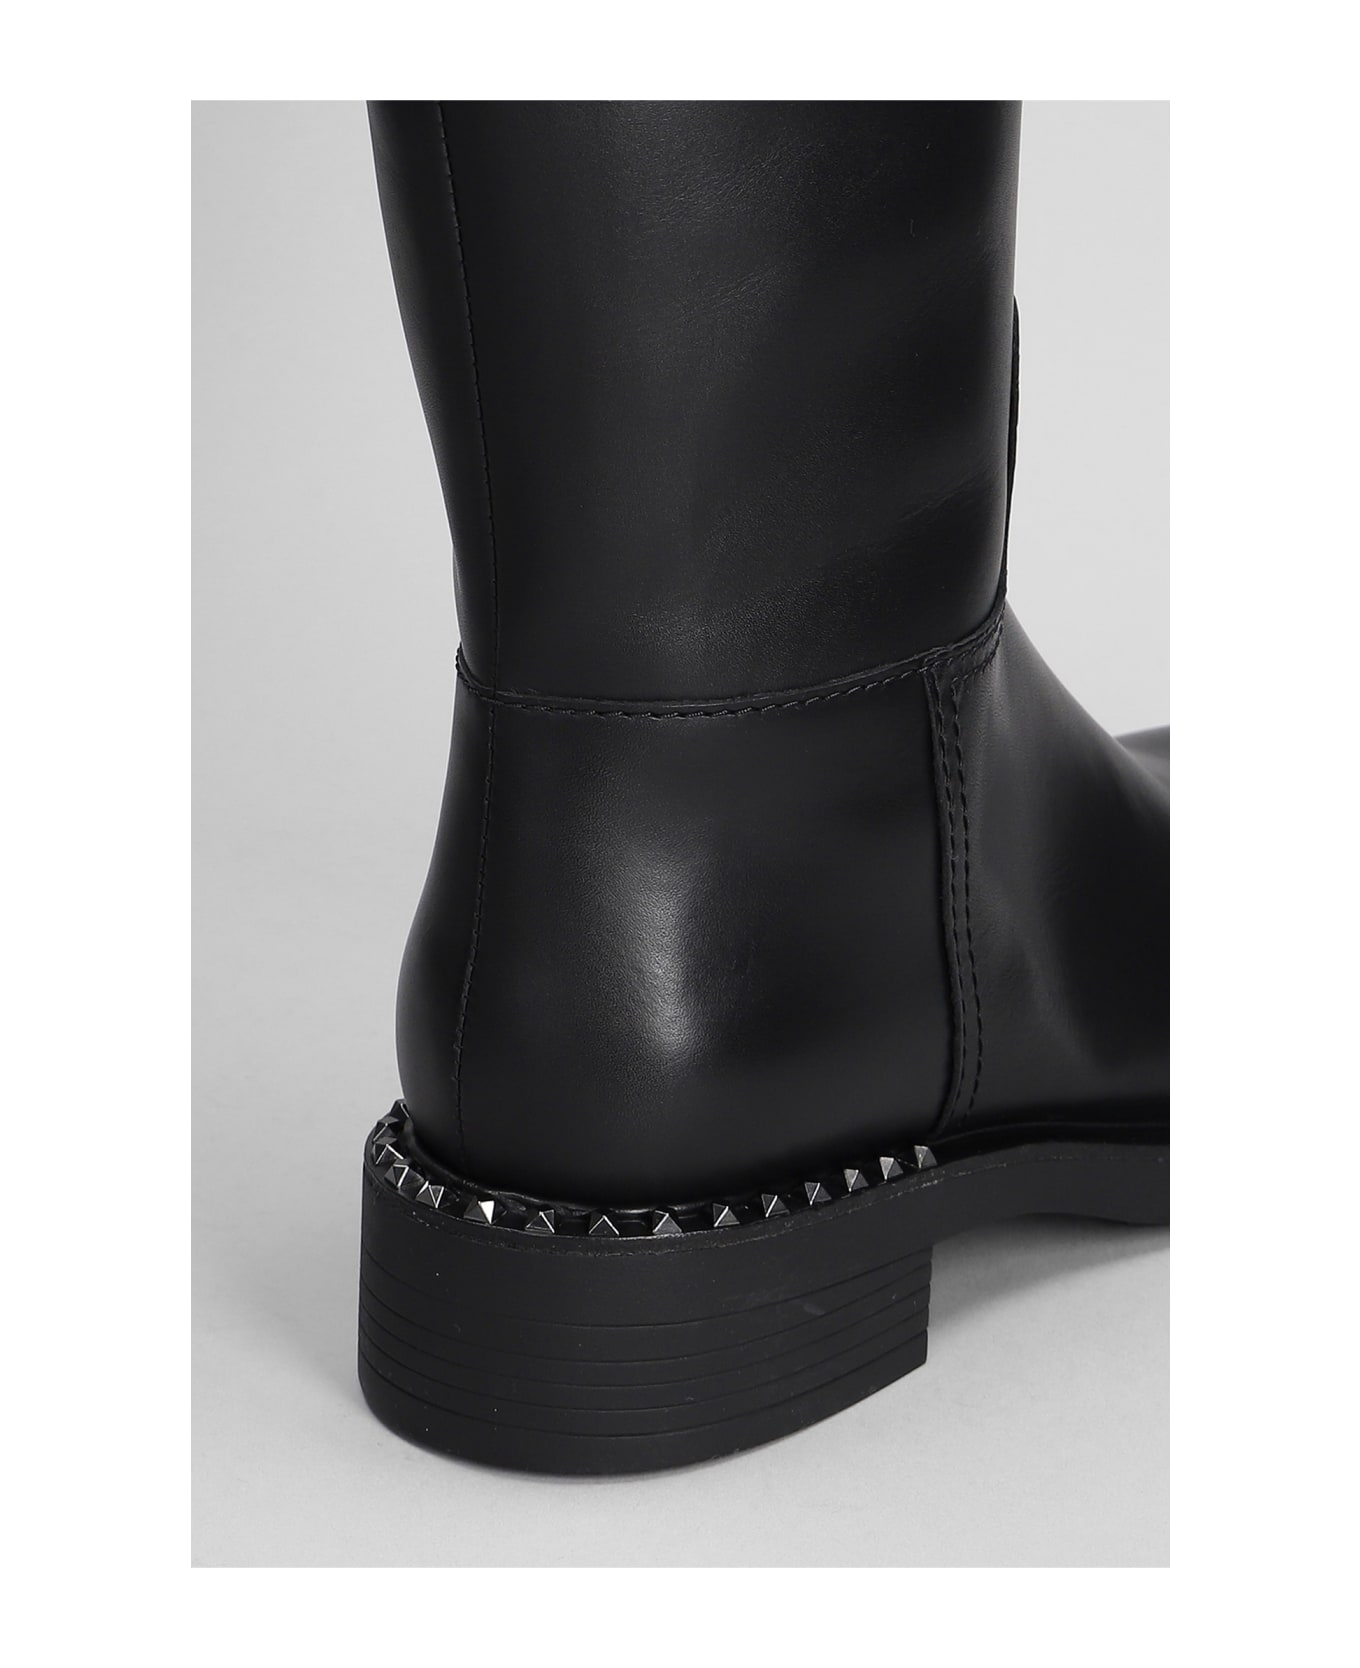 Ash Faith Low Heels Boots In Black Leather - Black